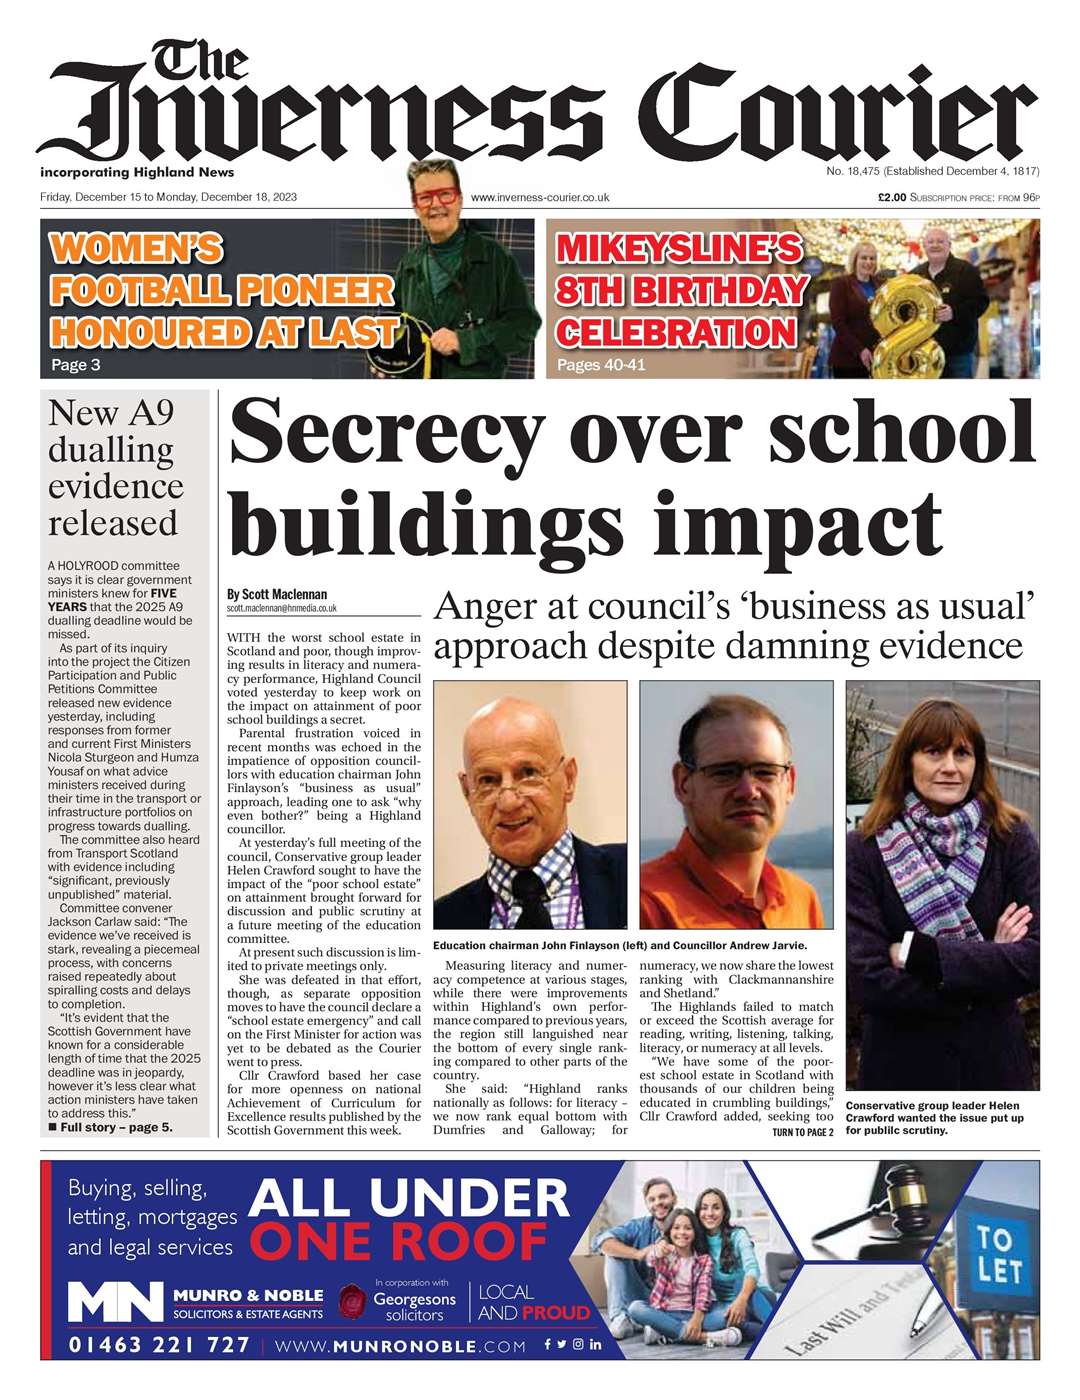 The Inverness Courier, December 15, front page.